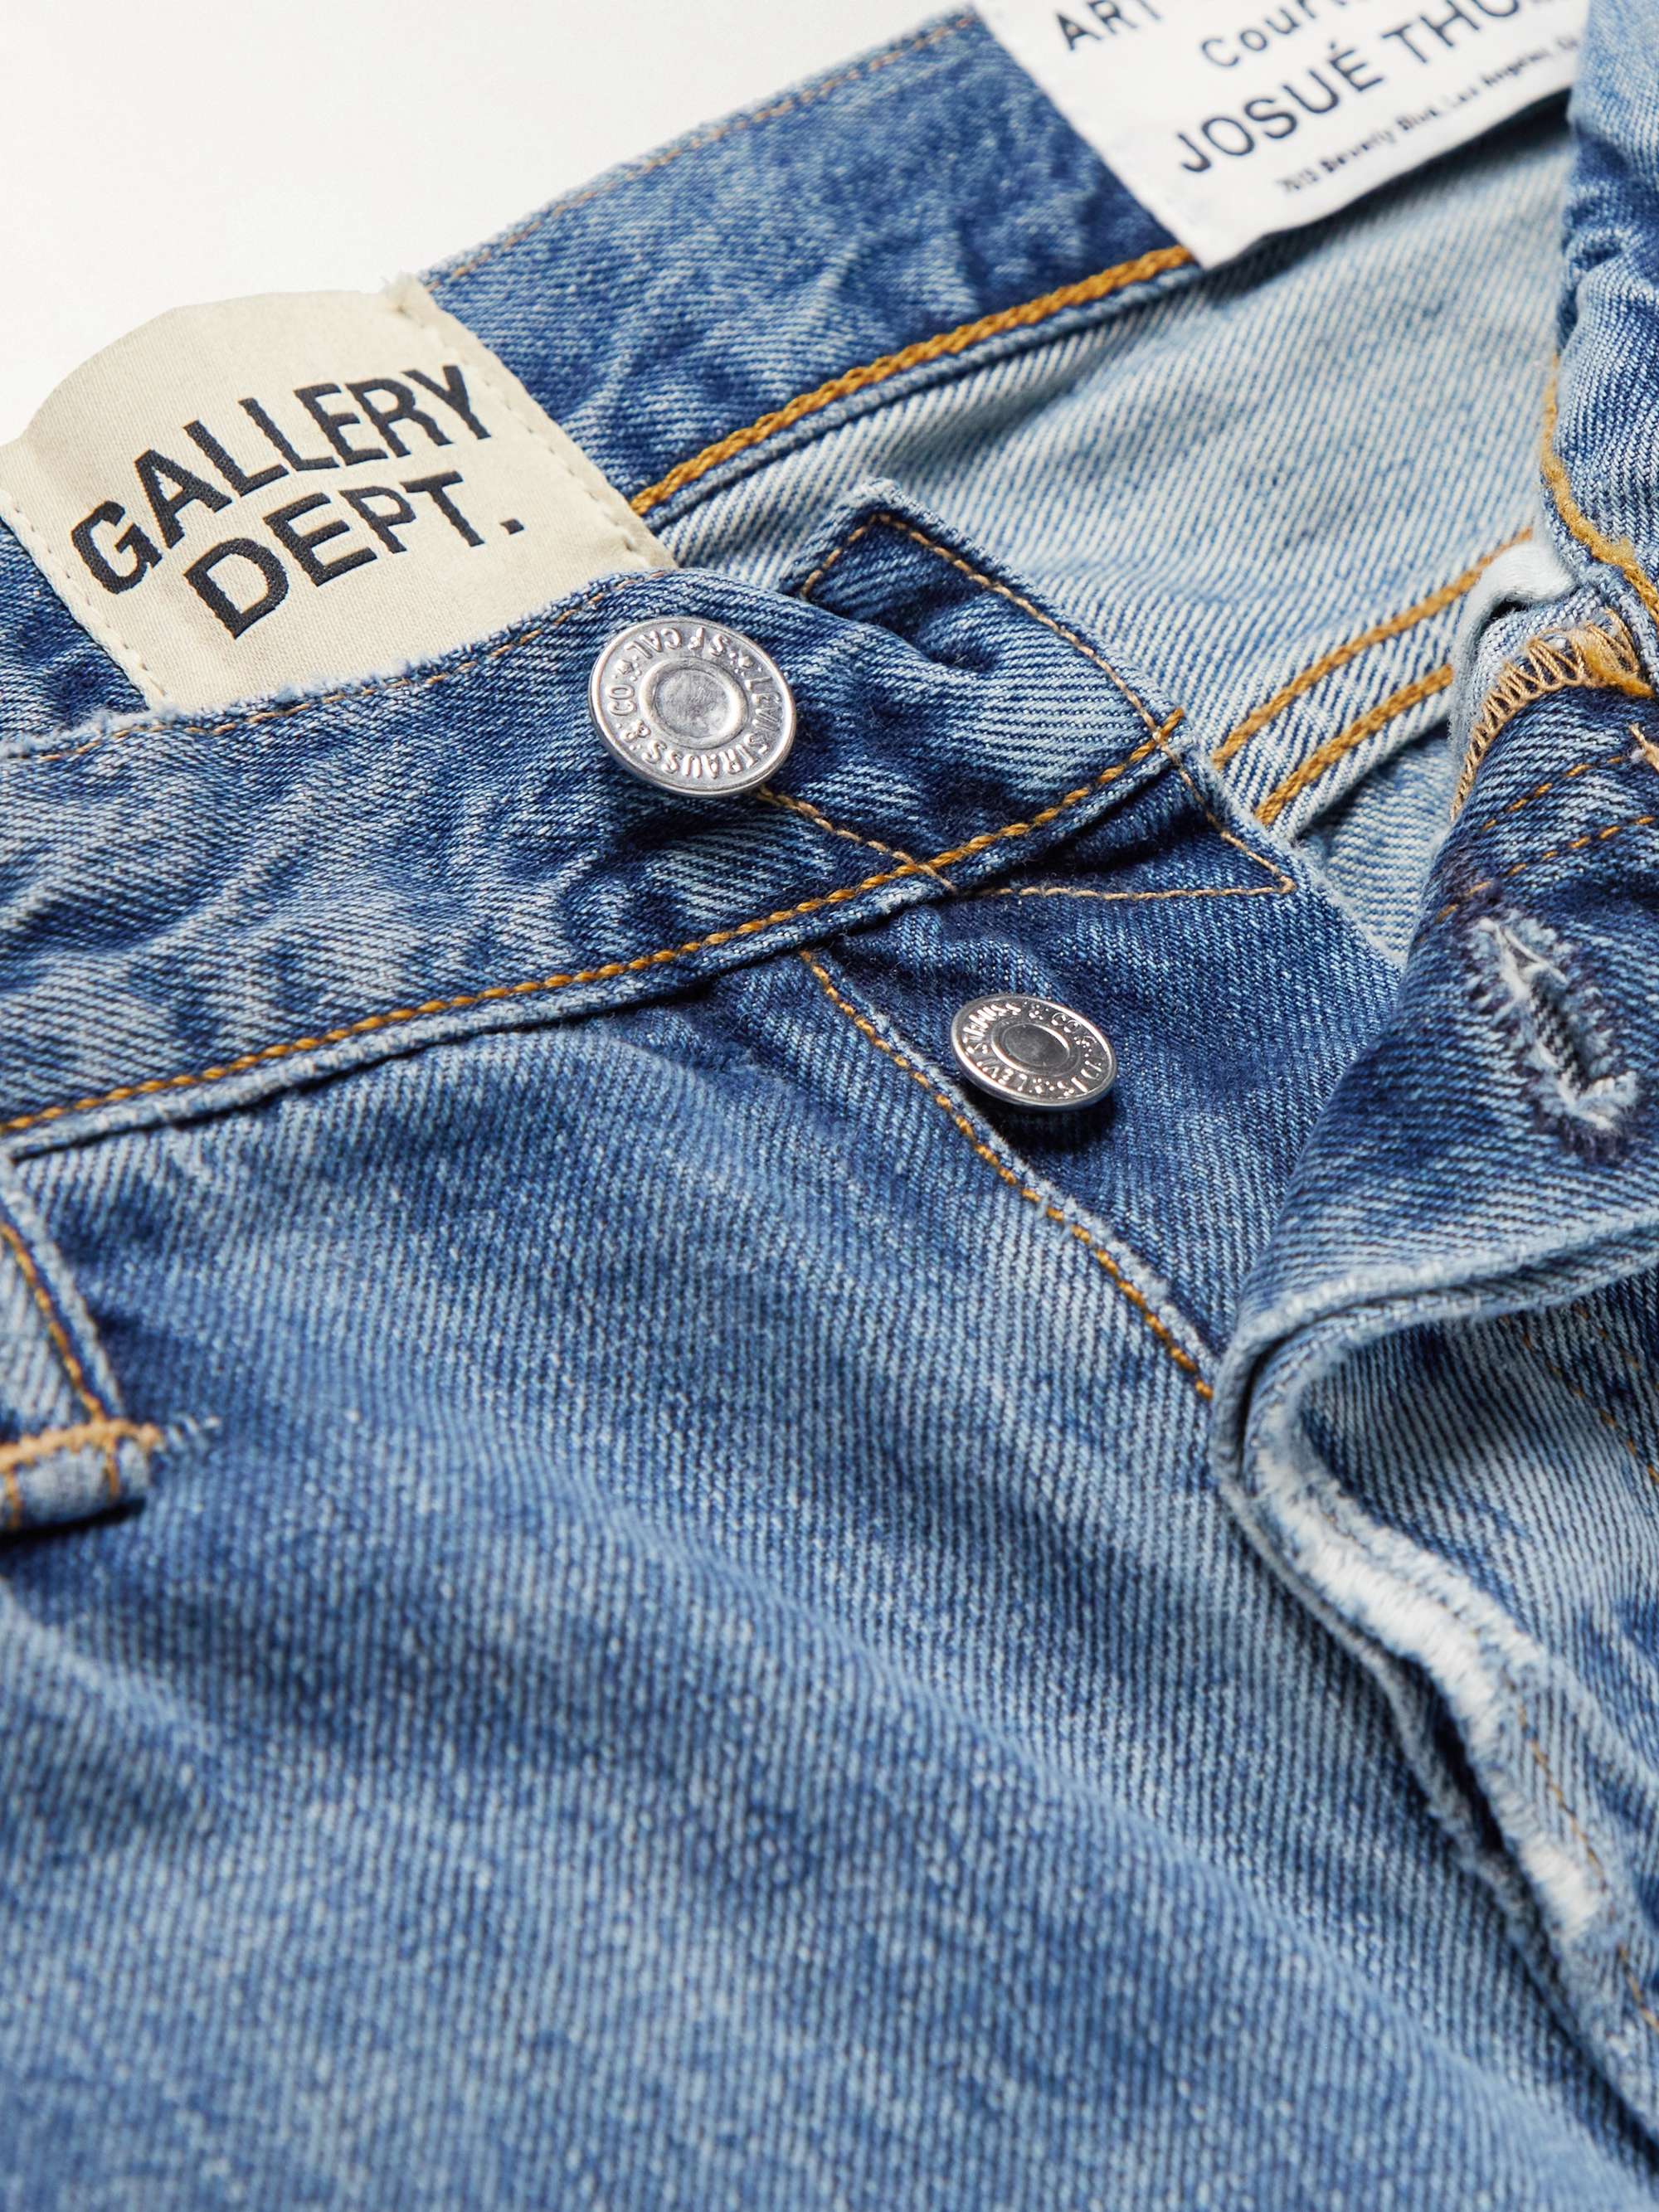 GALLERY DEPT. 5001 Distressed Jeans